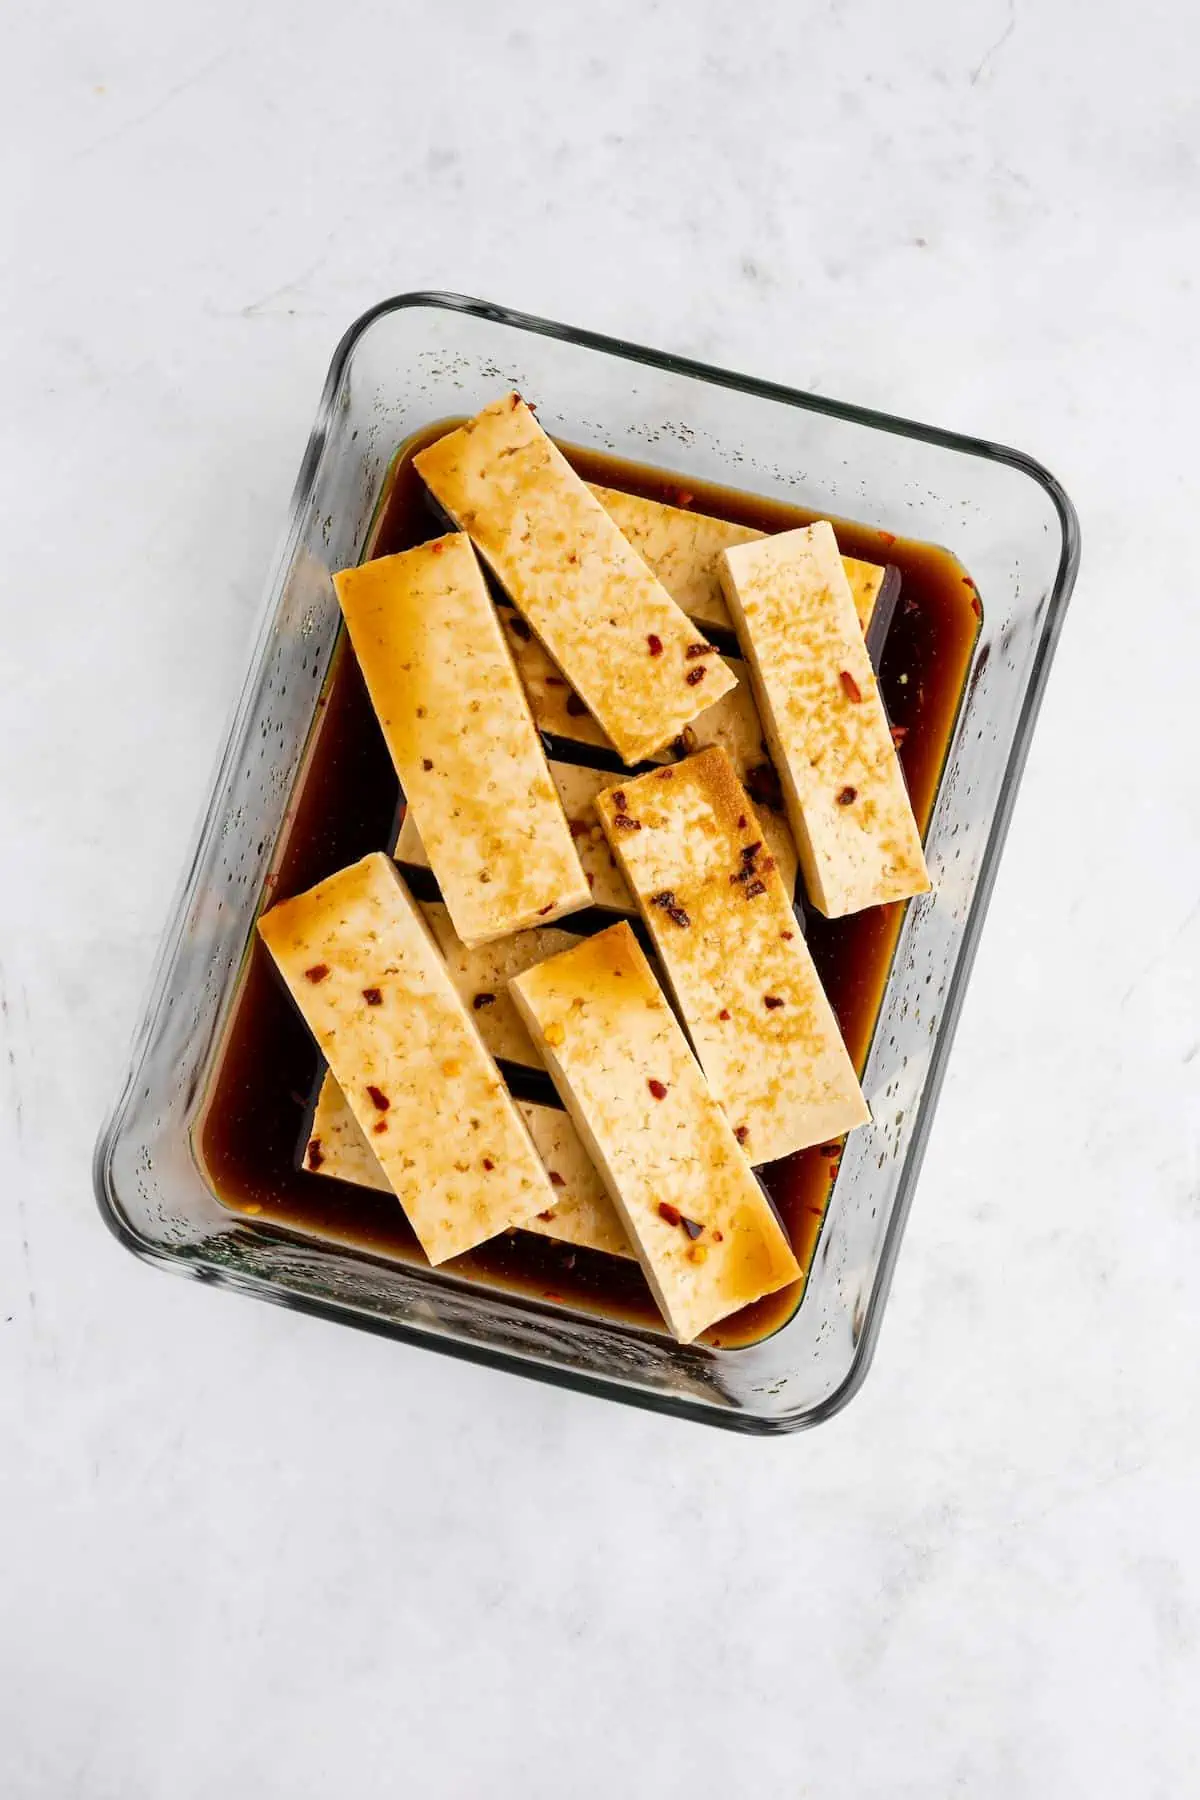 Tofu slices marinating in a large shallow glass dish.